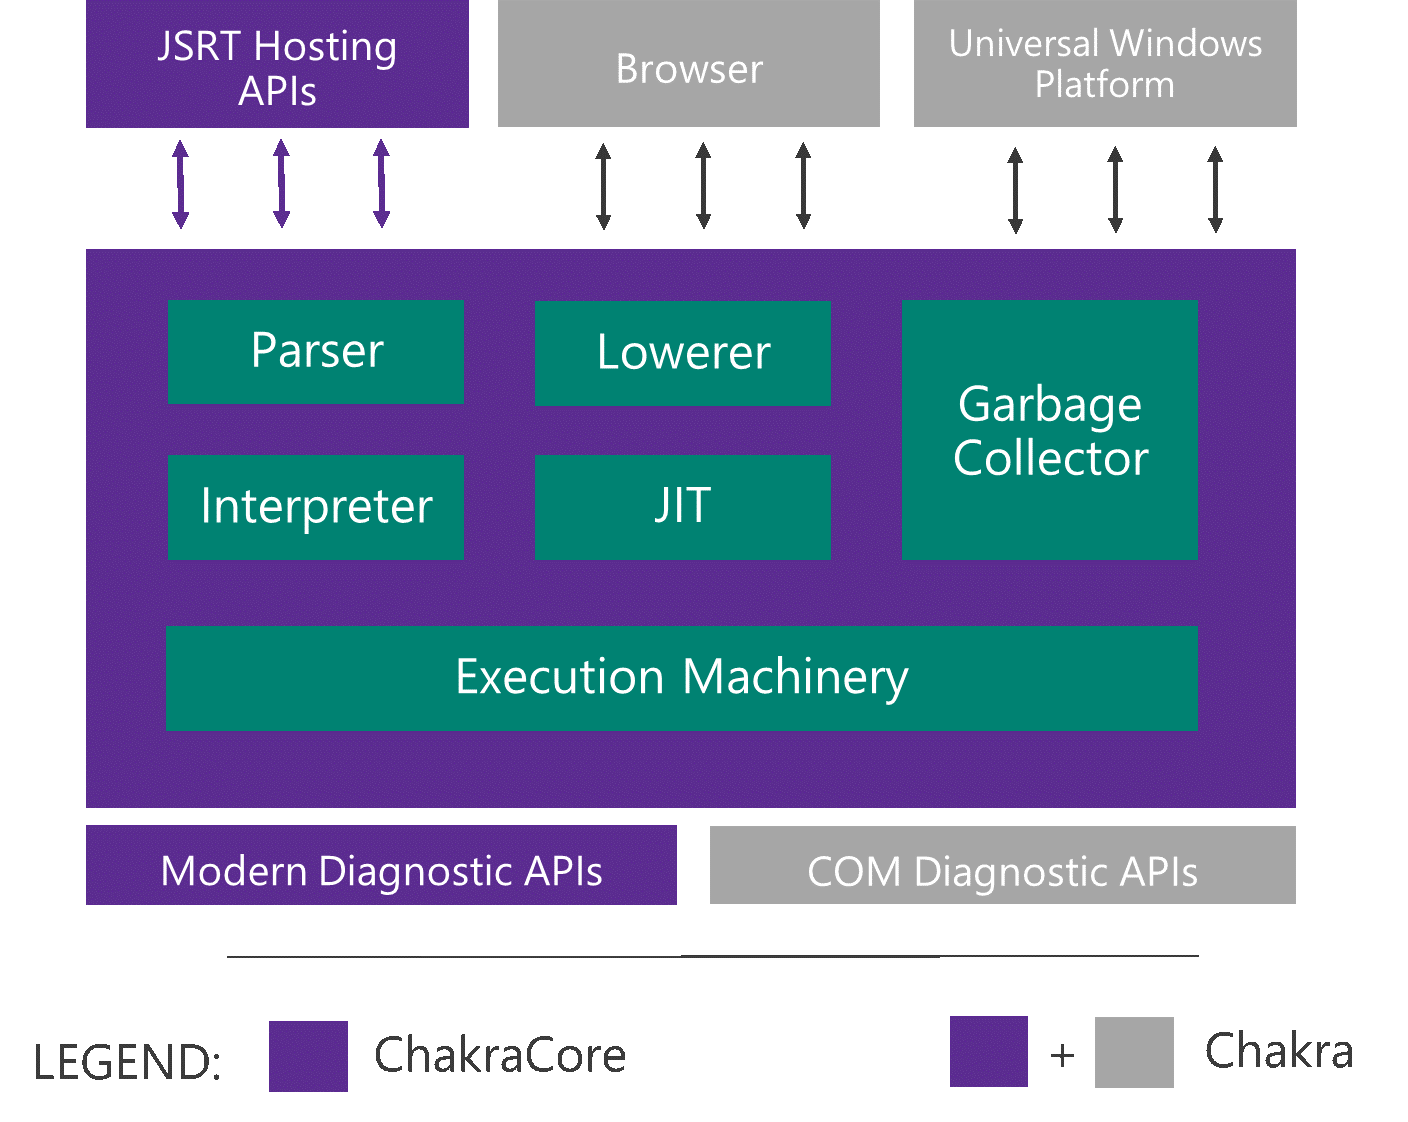 Diagram showing the componentization of Chakra and ChakraCore. ChakraCore contains all the core components of Chakra with the exception of COM diagnostic APIs and the private bindings to the Microsoft Edge browser and Universal Windows Platform. 